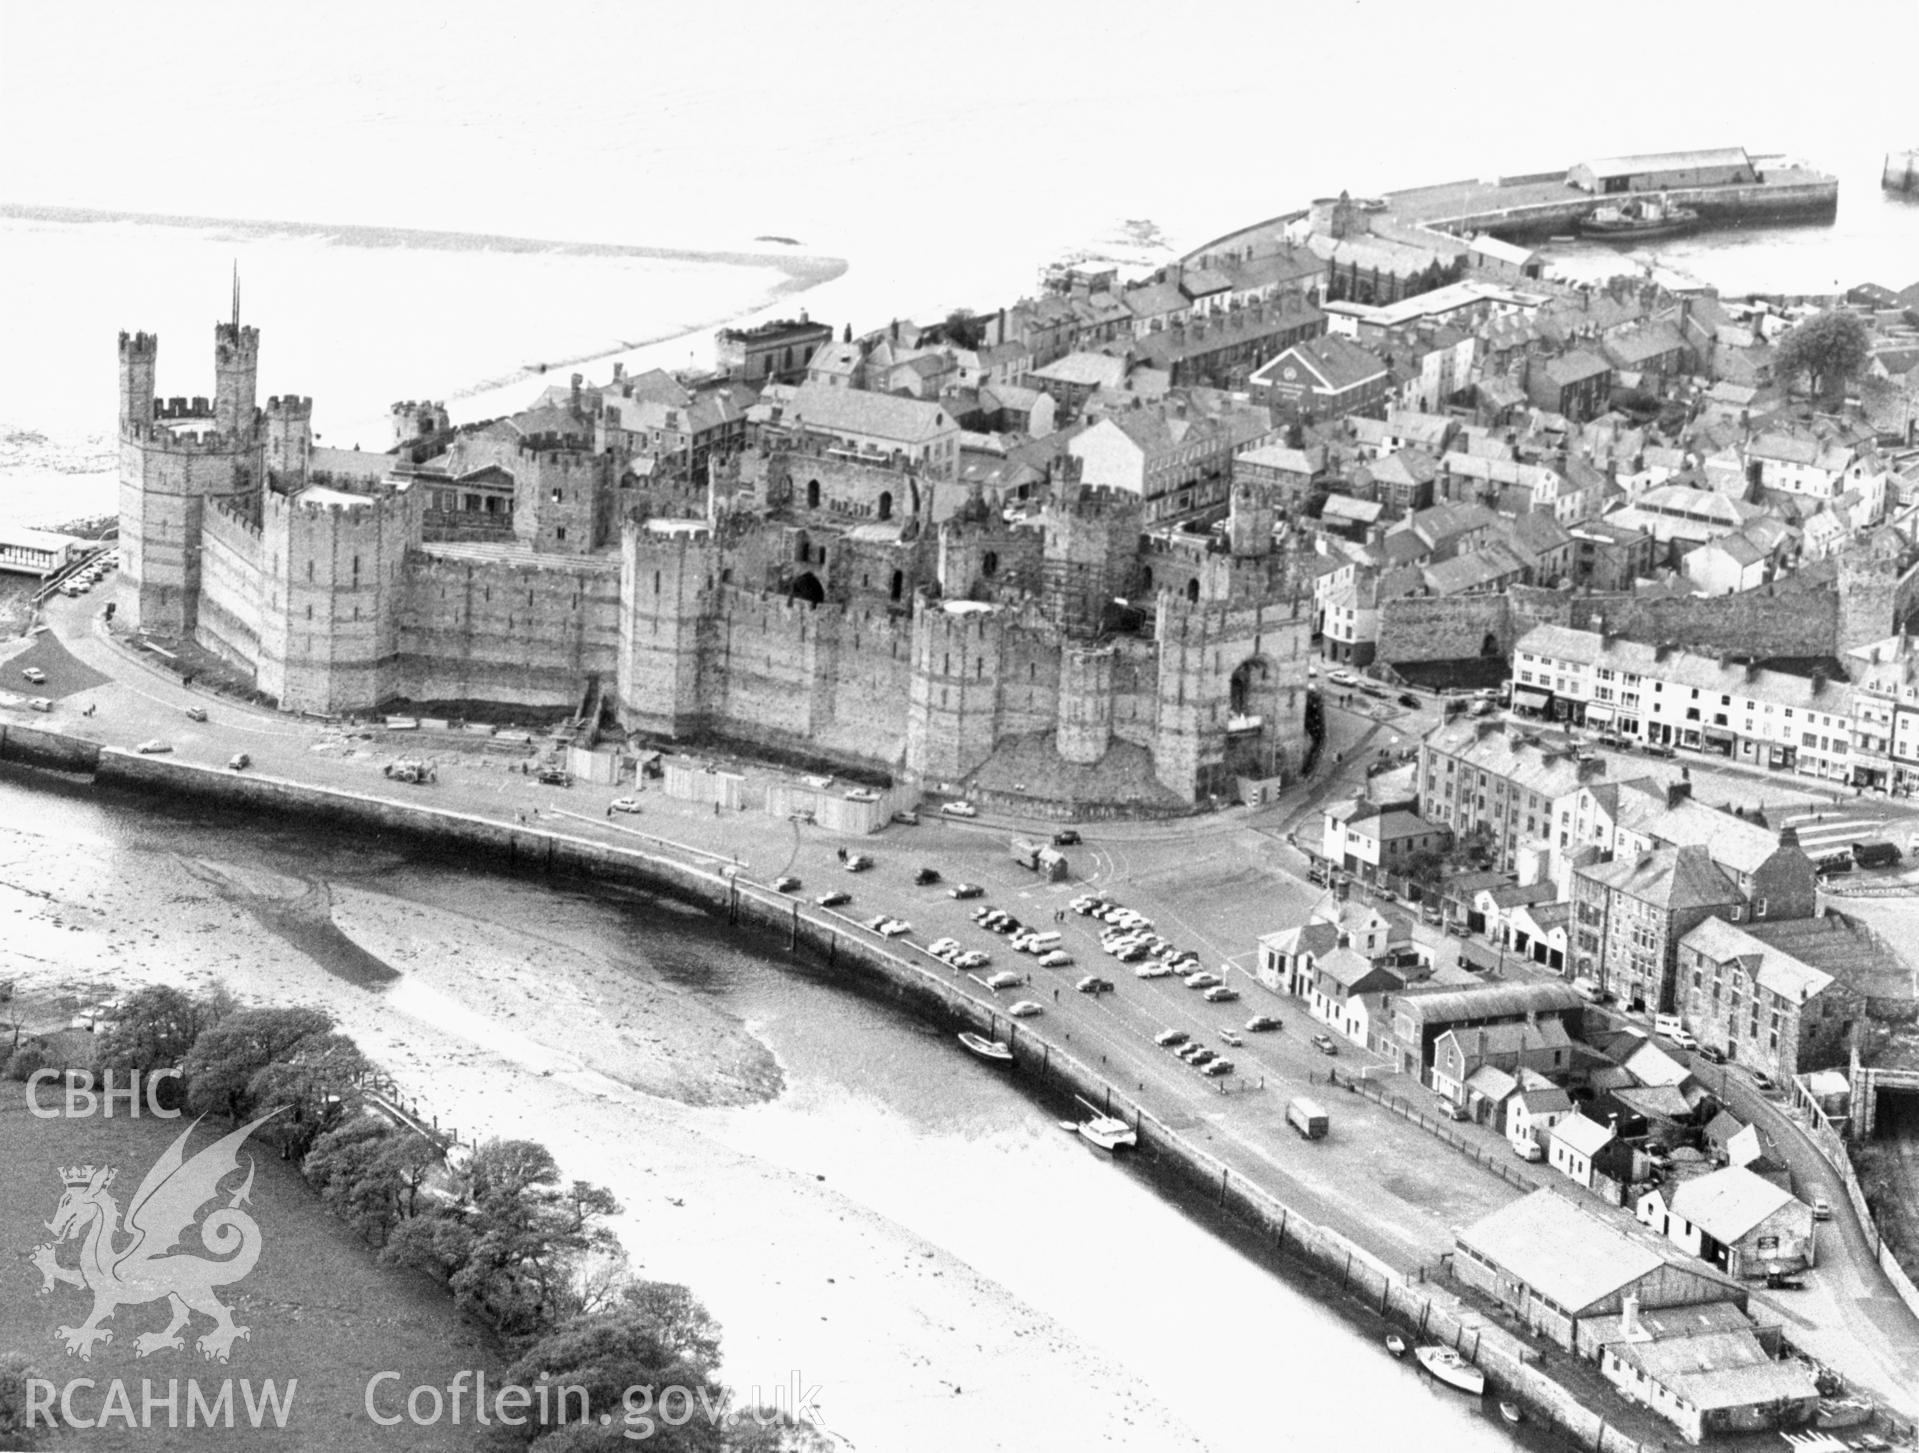 1 b/w print showing aerial view of Caernarfon castle and surrounding town, collated by the former Central Office of Information.